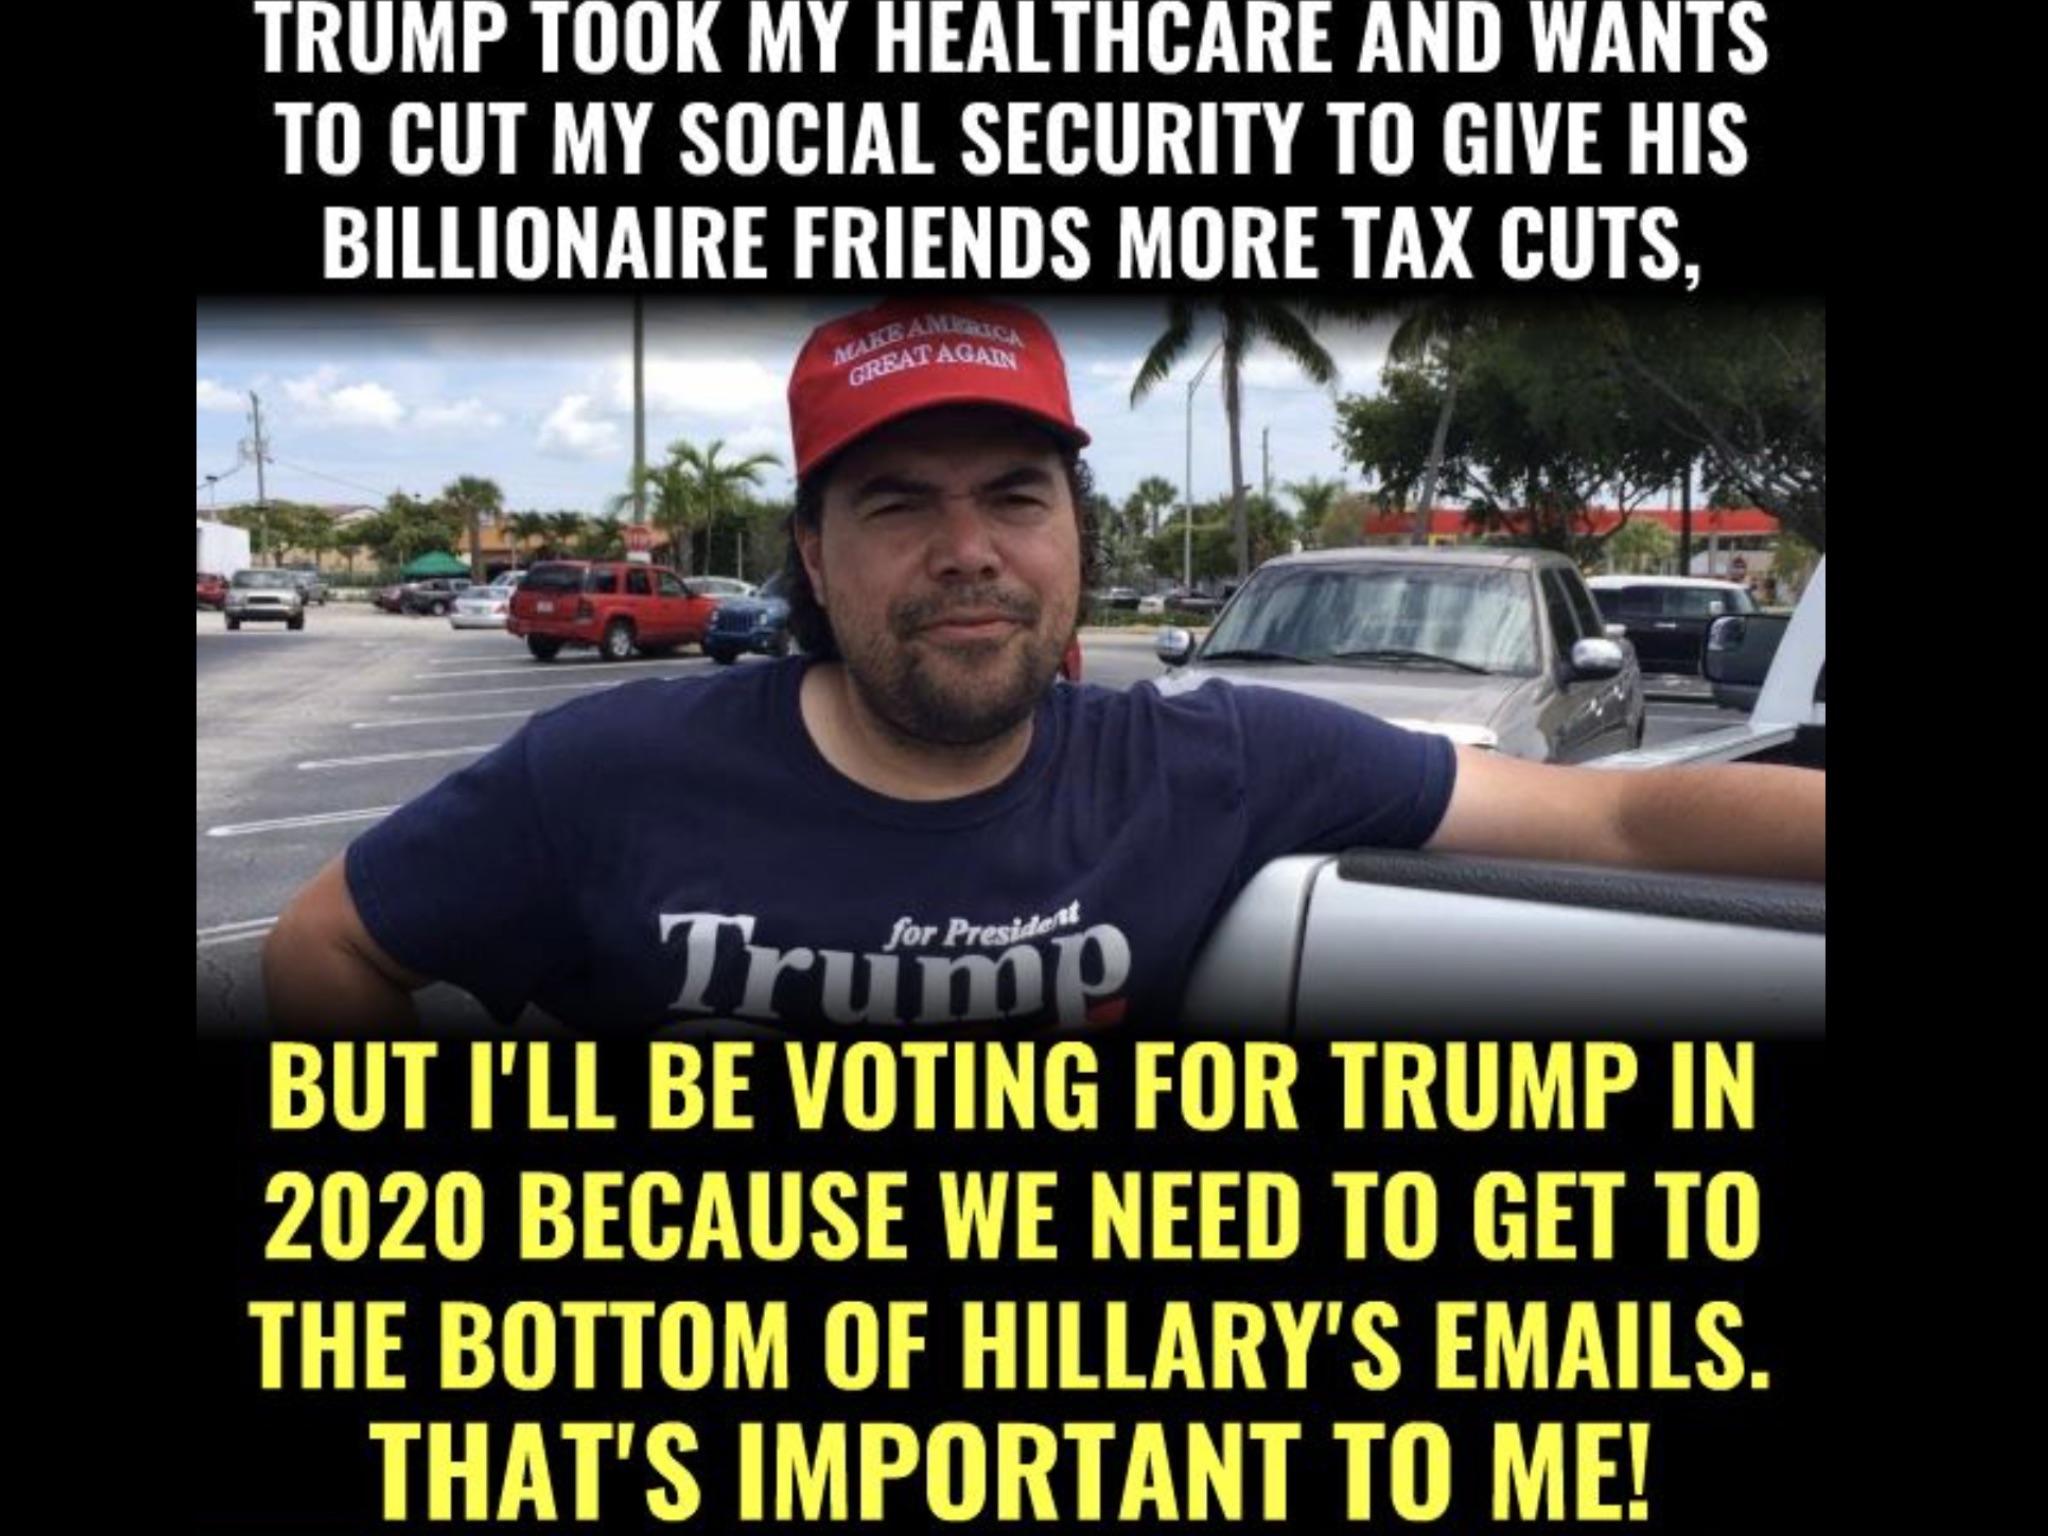 car - Trump Took My Healthcare And Wants To Cut My Social Security To Give His Billionaire Friends More Tax Cuts, Make Altagad Great But I'Ll Be Voting For Trump In 2020 Because We Need To Get To The Bottom Of Hillary'S Emails. That'S Important To Me!